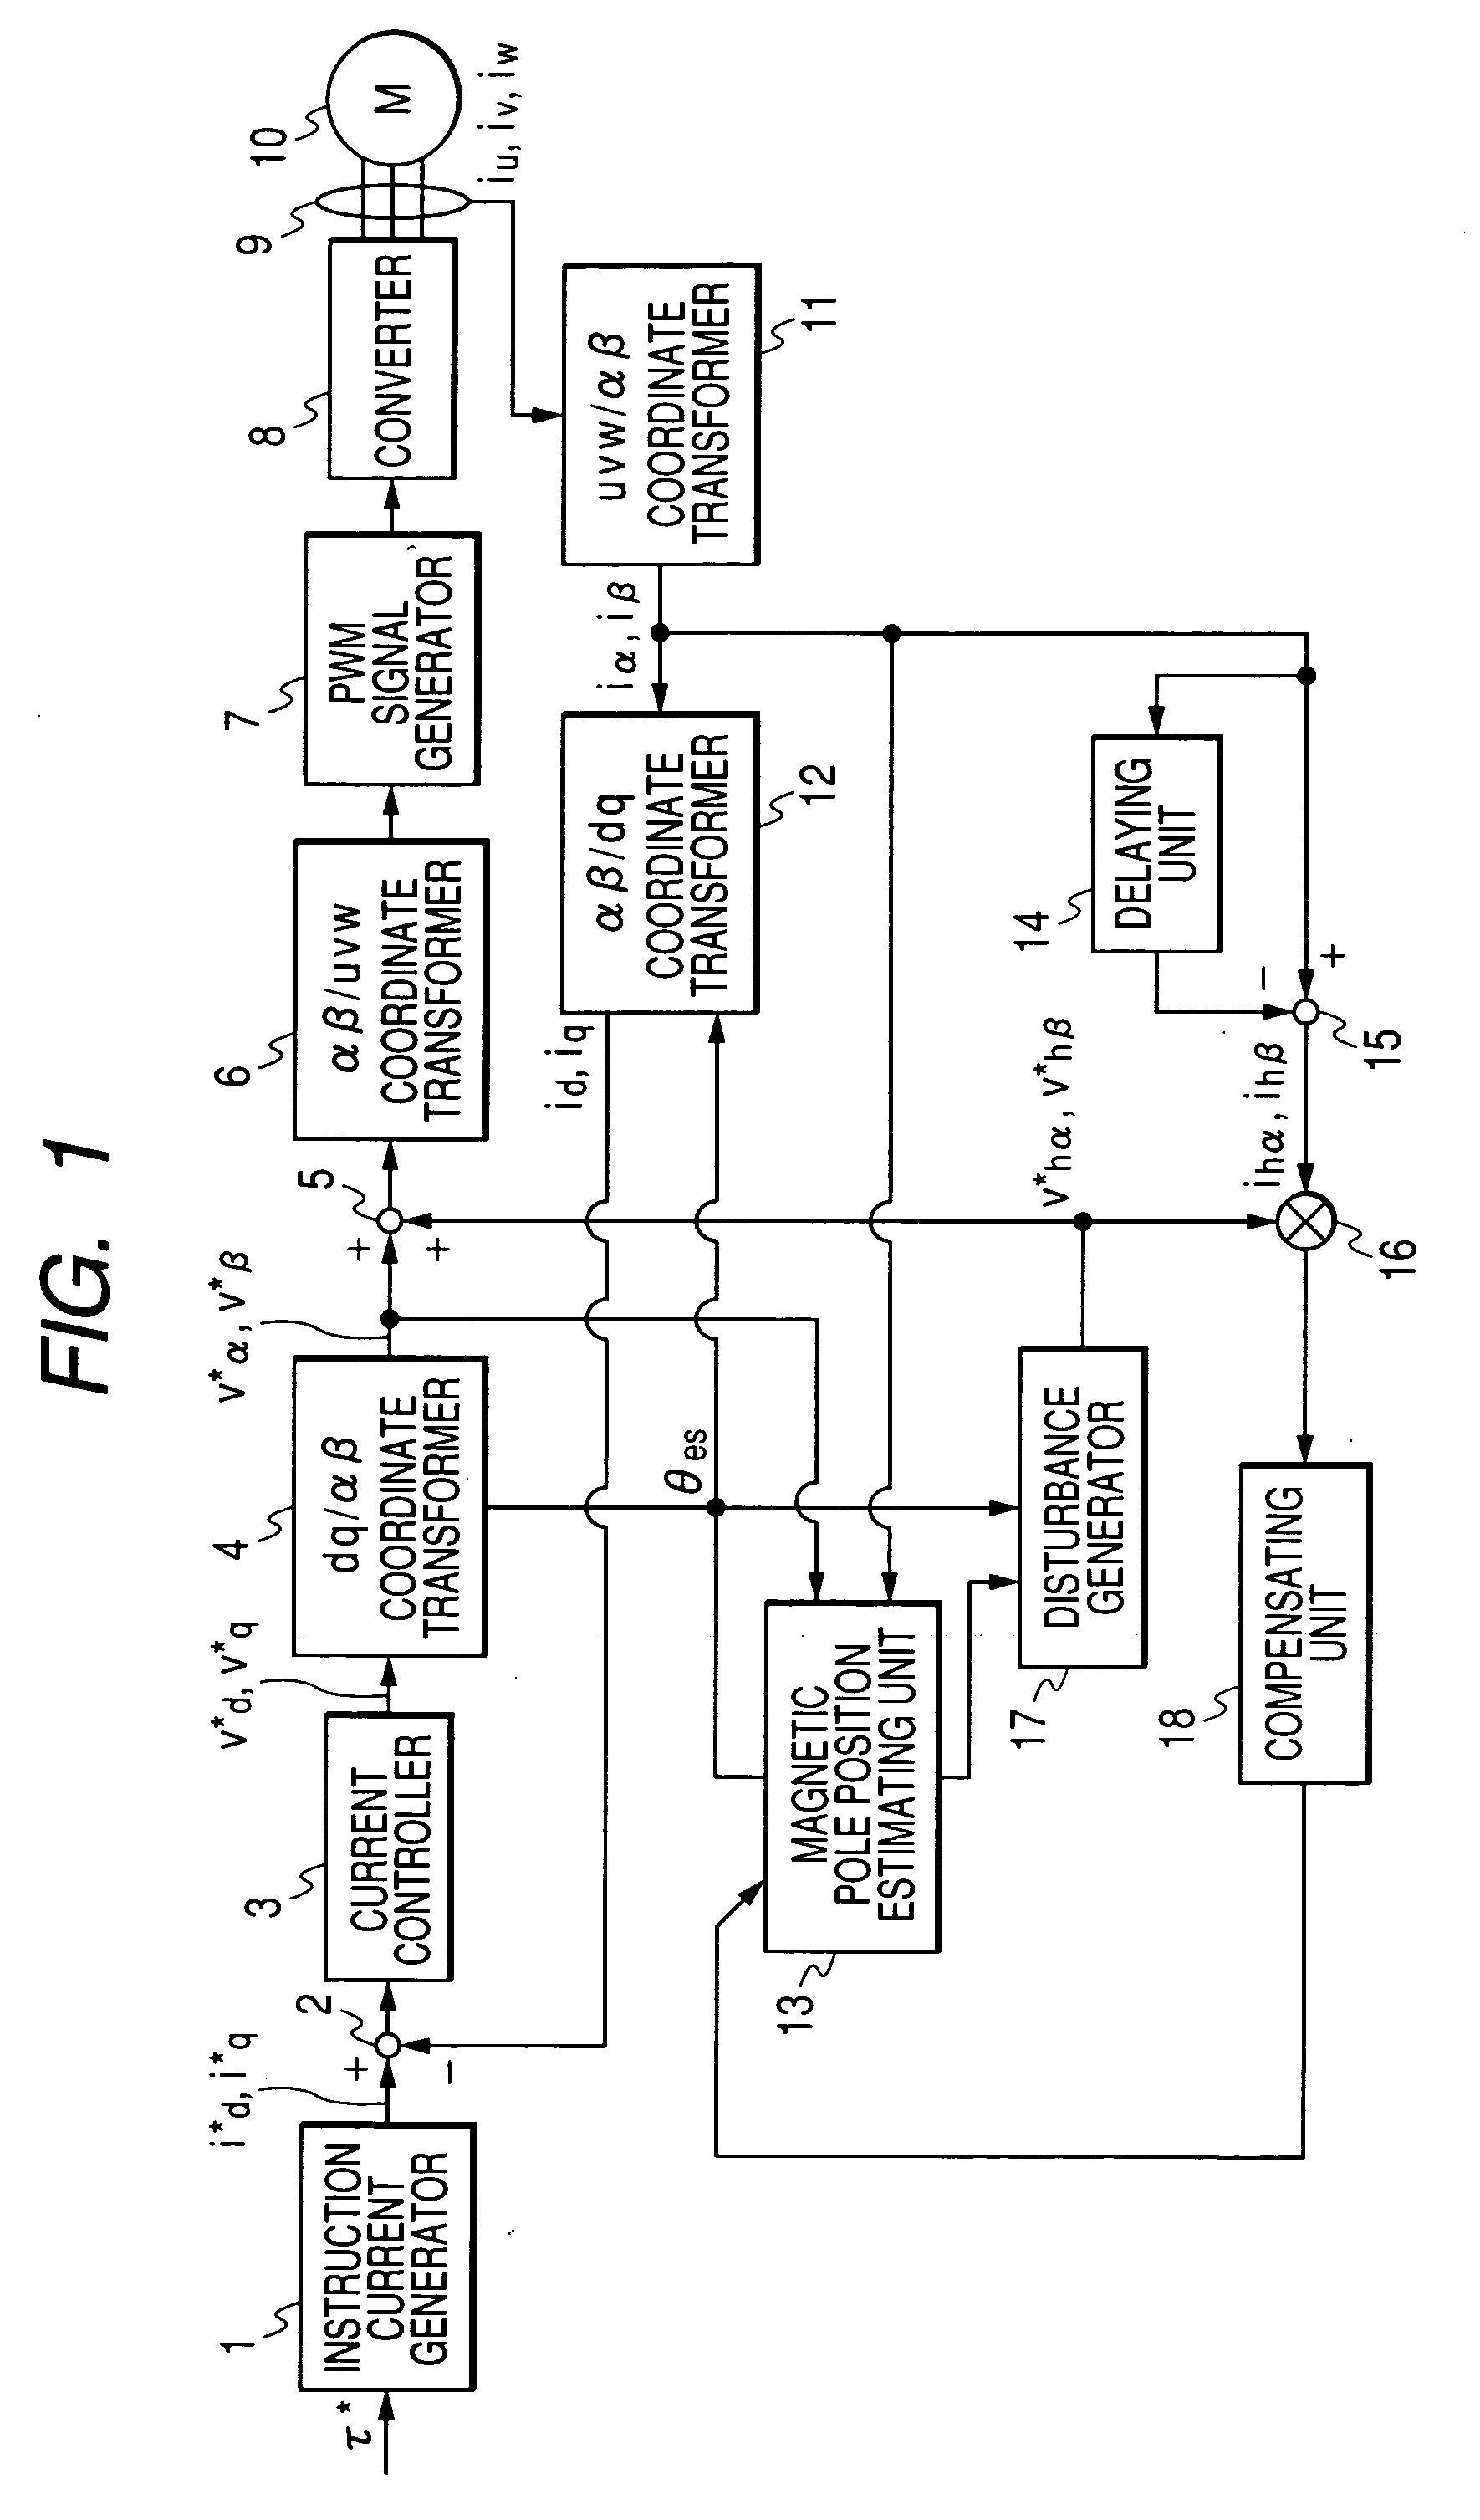 Method of estimating magnetic pole position in motor and apparatus of controlling the motor based on the estimated position